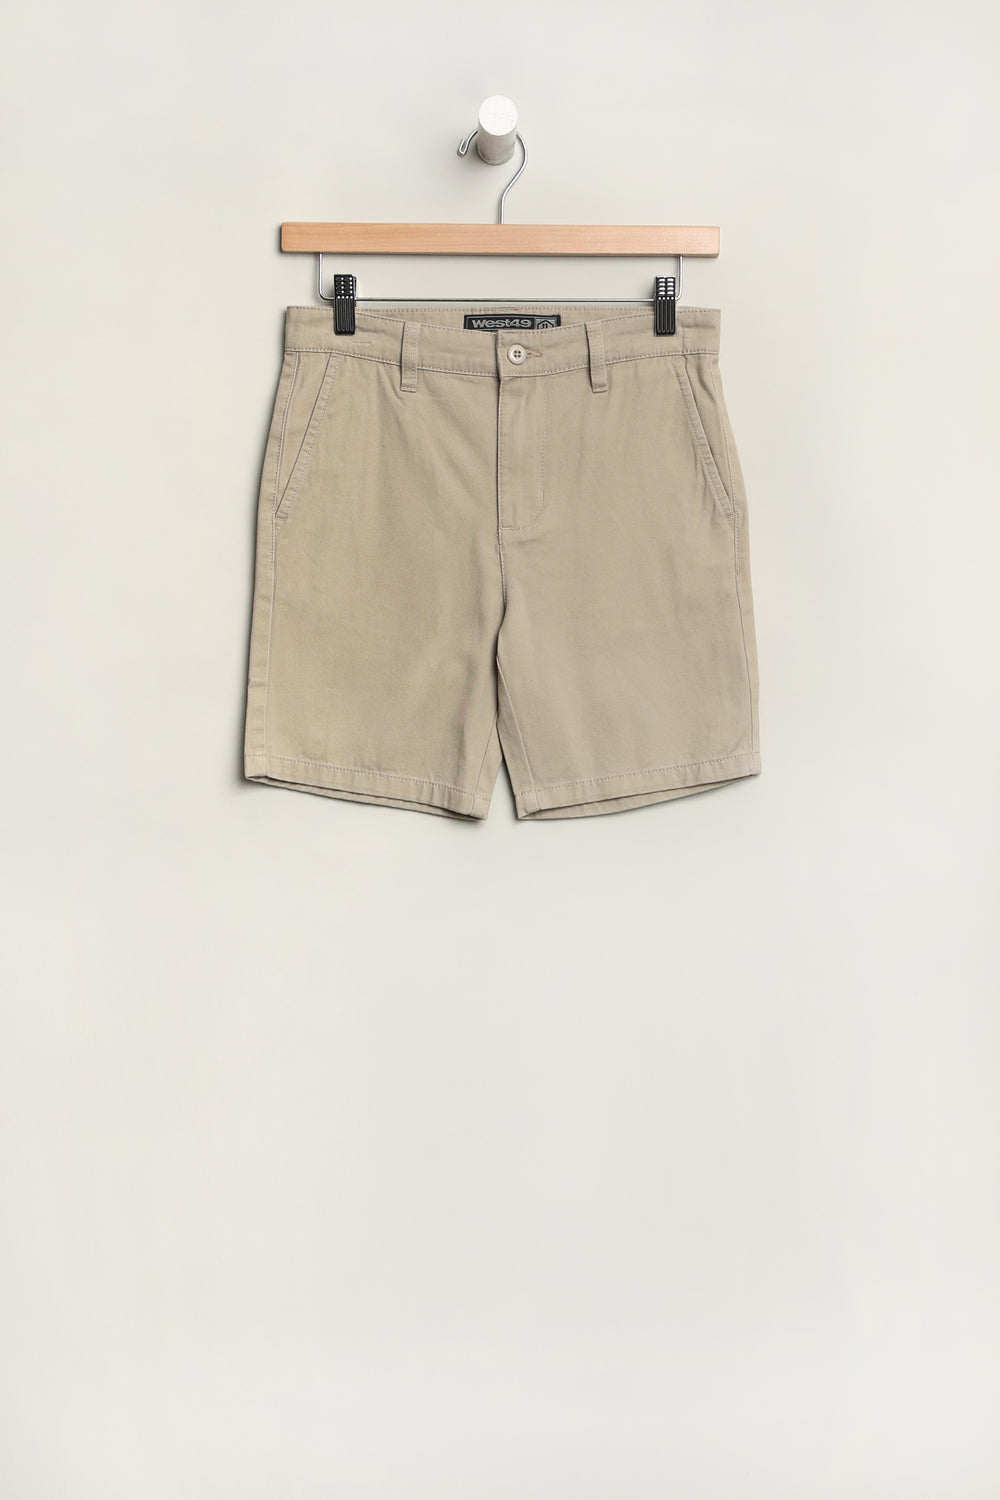 West49 Youth Twill Chino Shorts West49 Youth Twill Chino Shorts